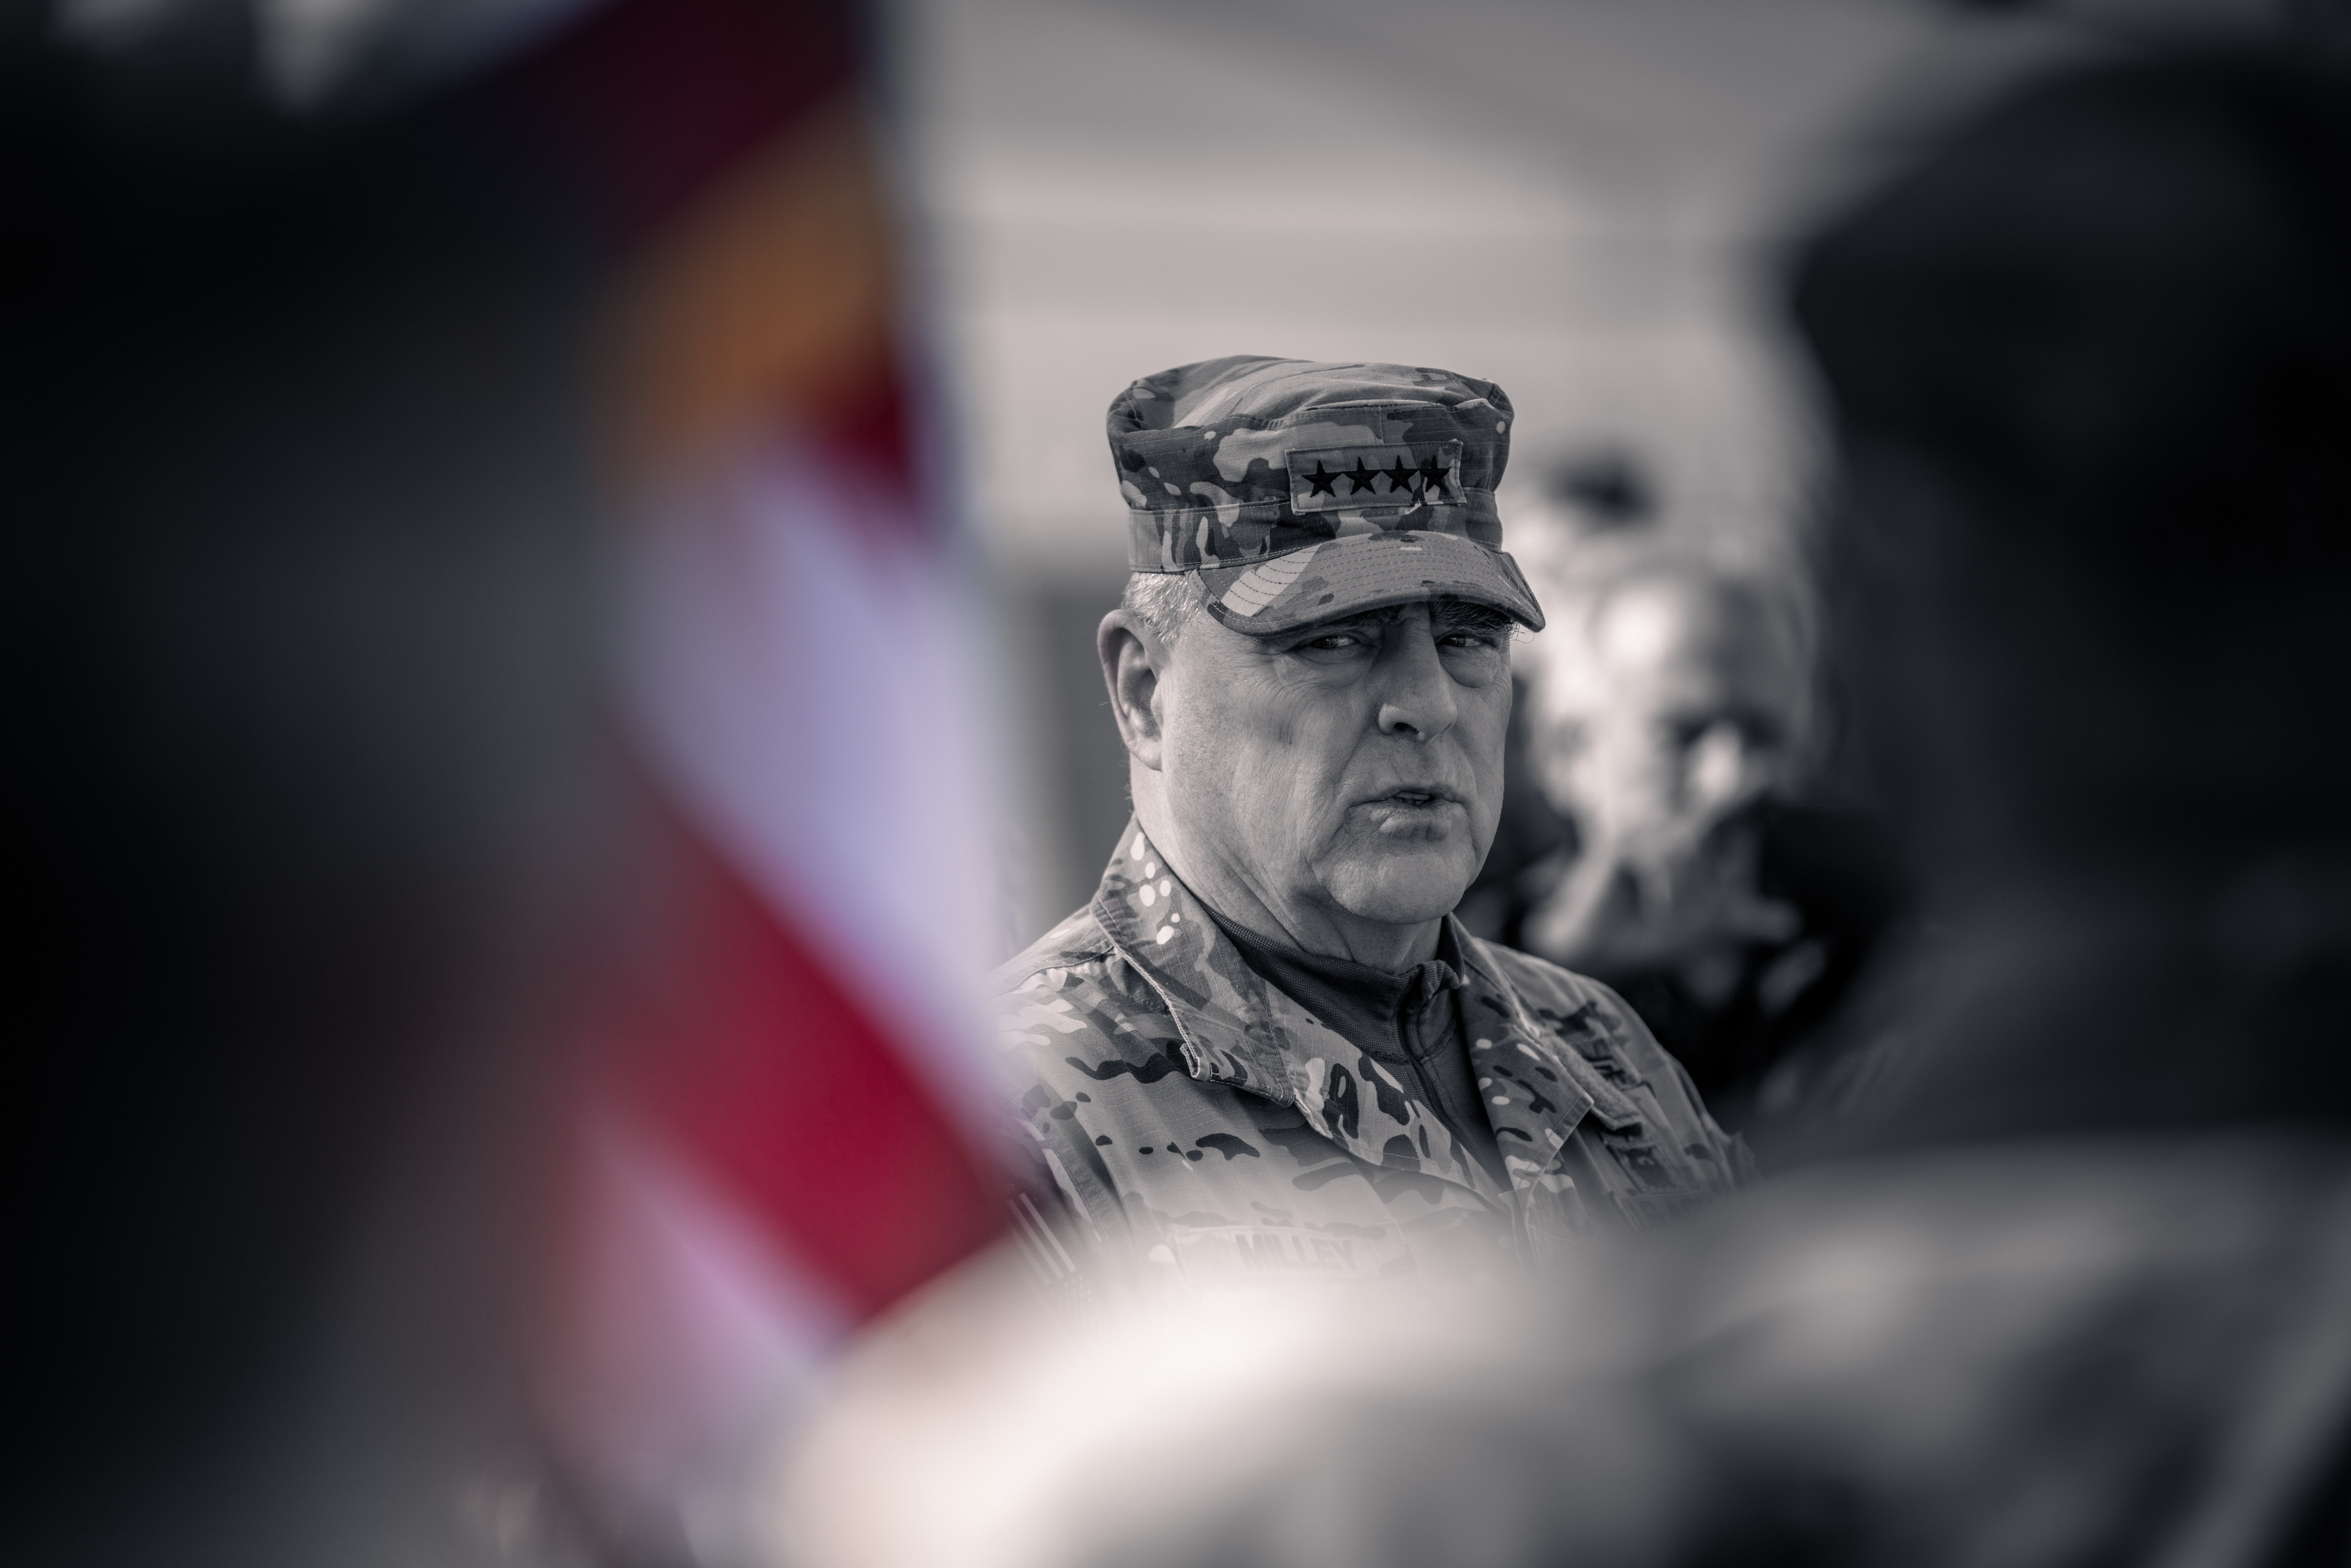 U.S. Army Gen. Mark A. Milley, Chairman of the Joint Chiefs of Staff, speaks to international reporters, during a visit to Adazi, Latvia on March 5, 2022. Gen. Milley, the highest-ranking U.S. military officer, joined with United States Ambassador to Latvia John Carwile, U.S. Army Europe and Africa commander Gen. Christopher Cavoli, and Latvian Lt. General Leonidis Kalnins to speak with NATO troops currently in Latvia. Gen. Milley said that recent U.S. troop deployments demonstrate our commitment to NATO Article 5 and told the troops present that their mission is to stand shoulder to shoulder in defending NATO against any aggression. (U.S. Army photo illustration by Maj. Robert Fellingham, color saturation has been altered for visual effect)